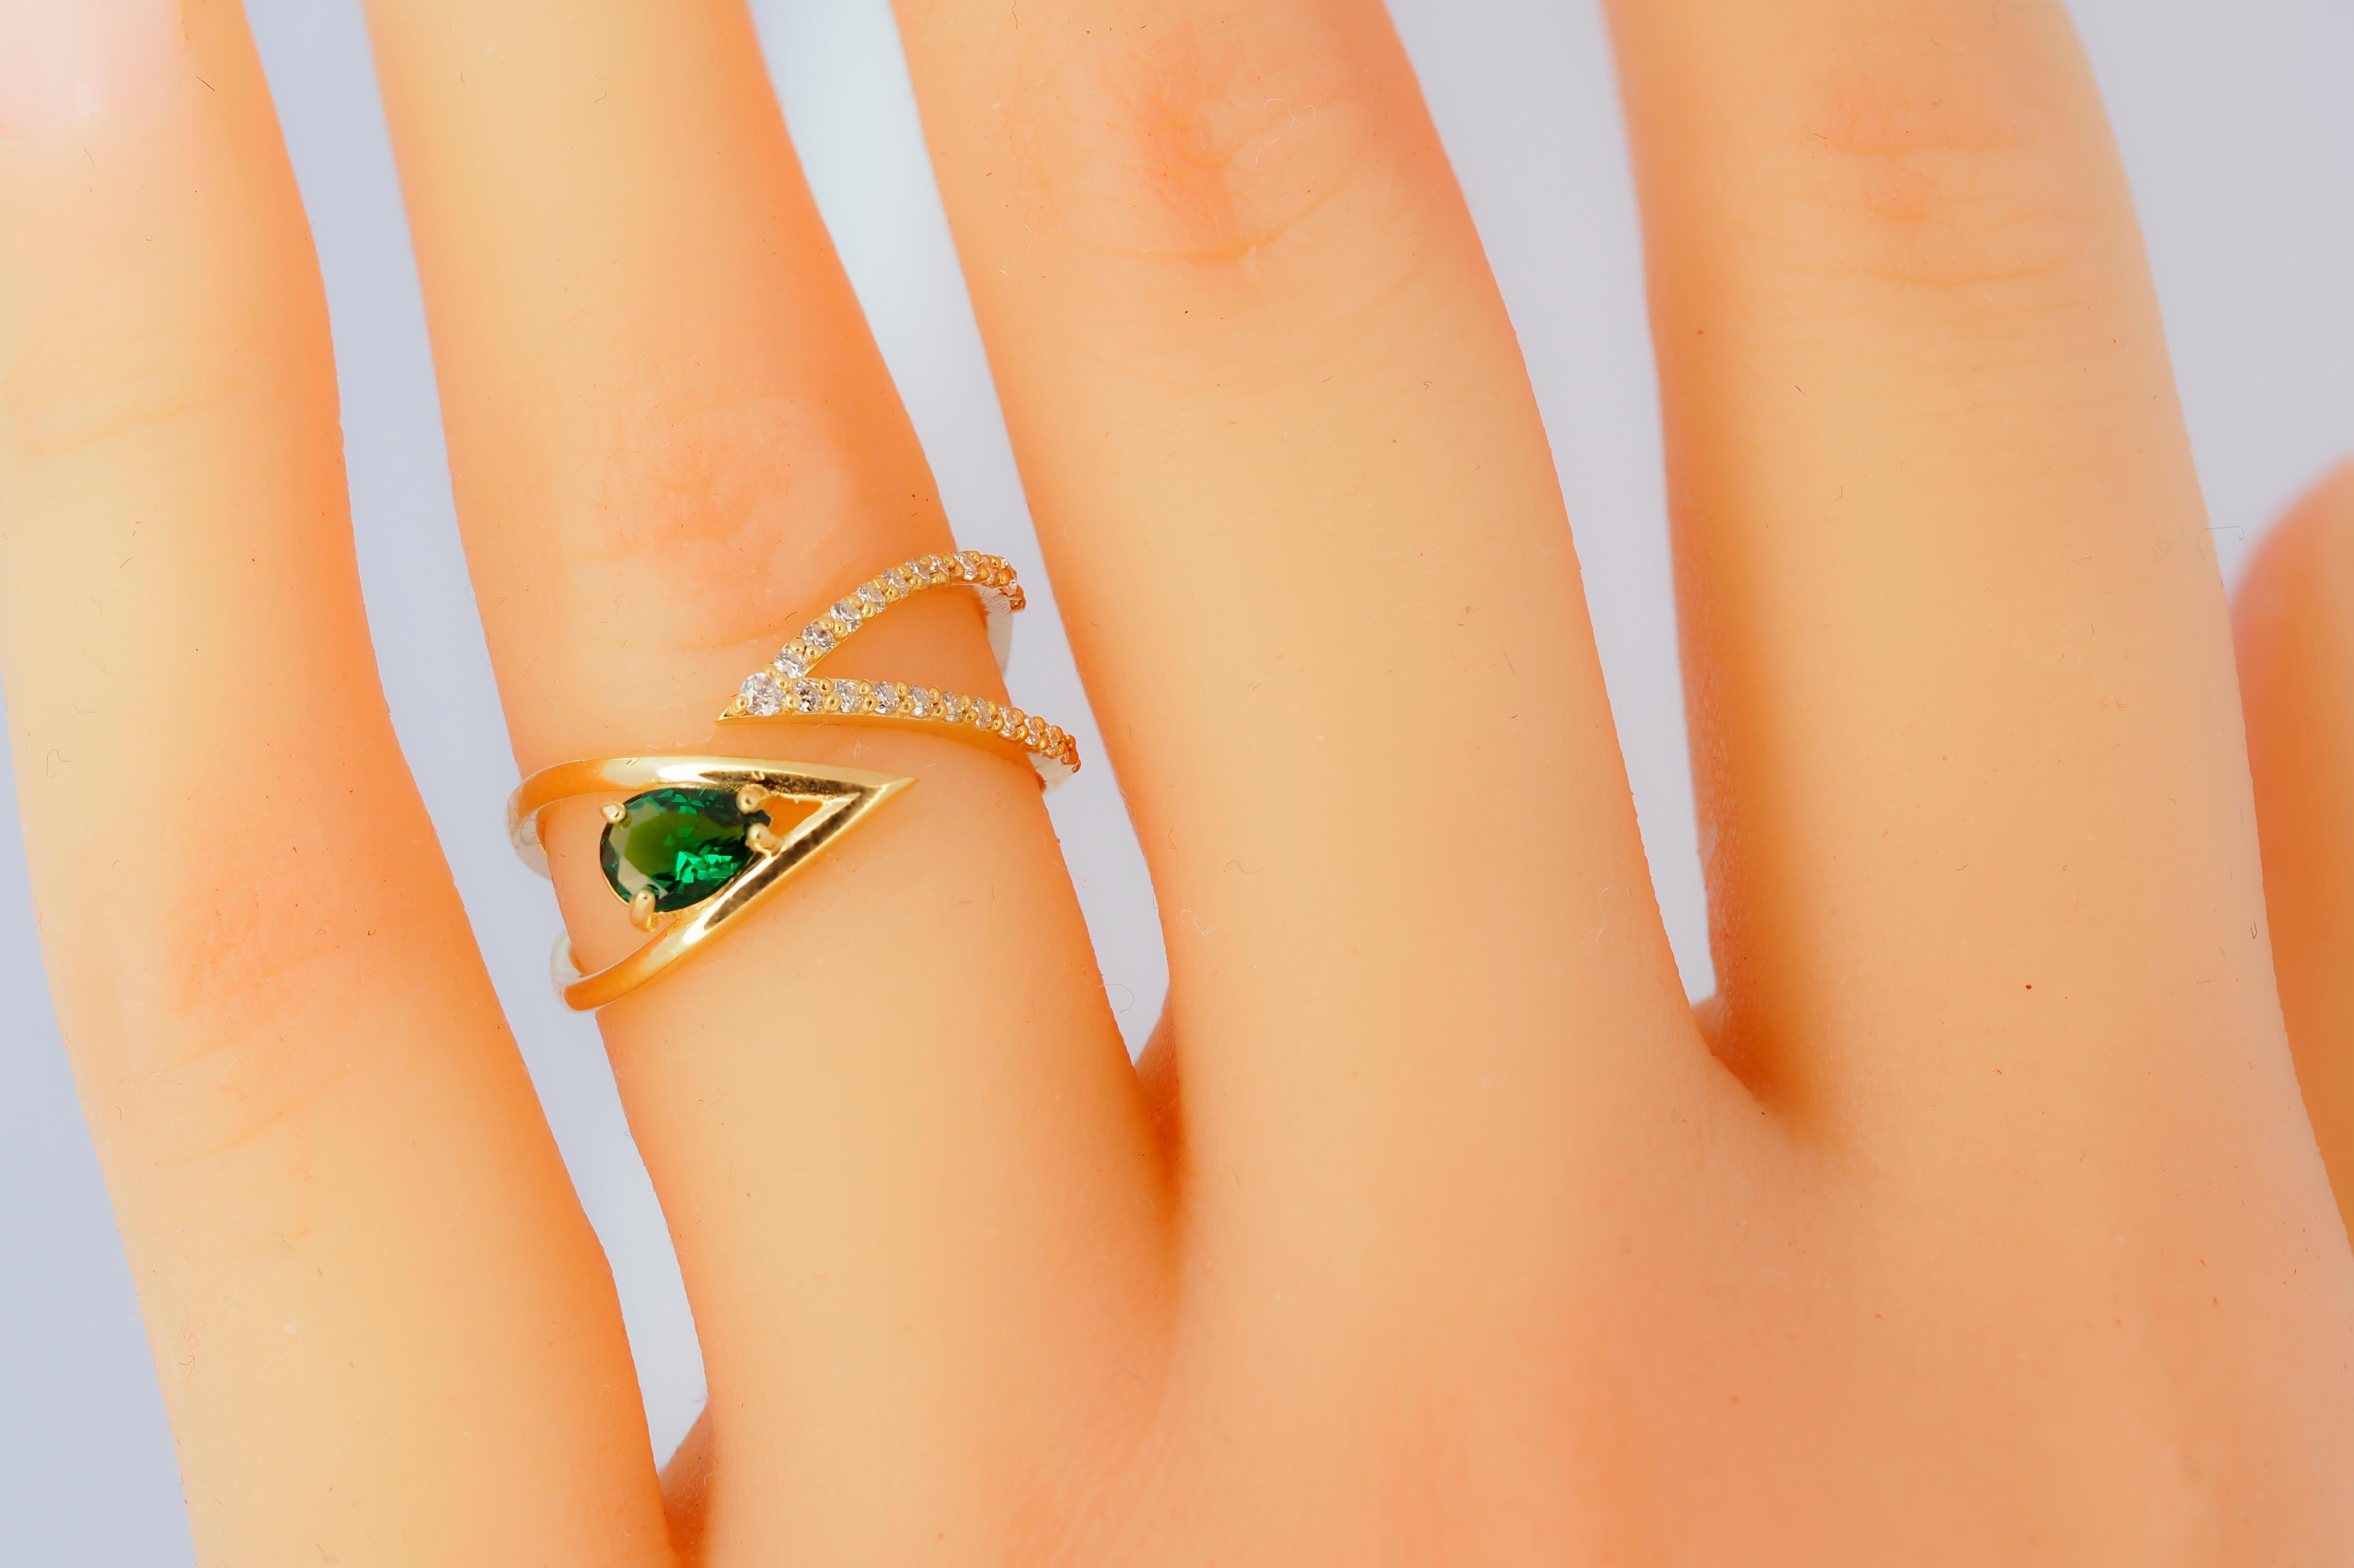 Pear cut lab emerald adjustable 14k gold ring. May birthstone emerald gold ring. Open ended ring. East West set Vintage style emerald ring.  Adjustable 14k Gold Pear Shaped Green Gem Ring For Women.

Metal: 14k gold
Weight: 2.2 gr depends from